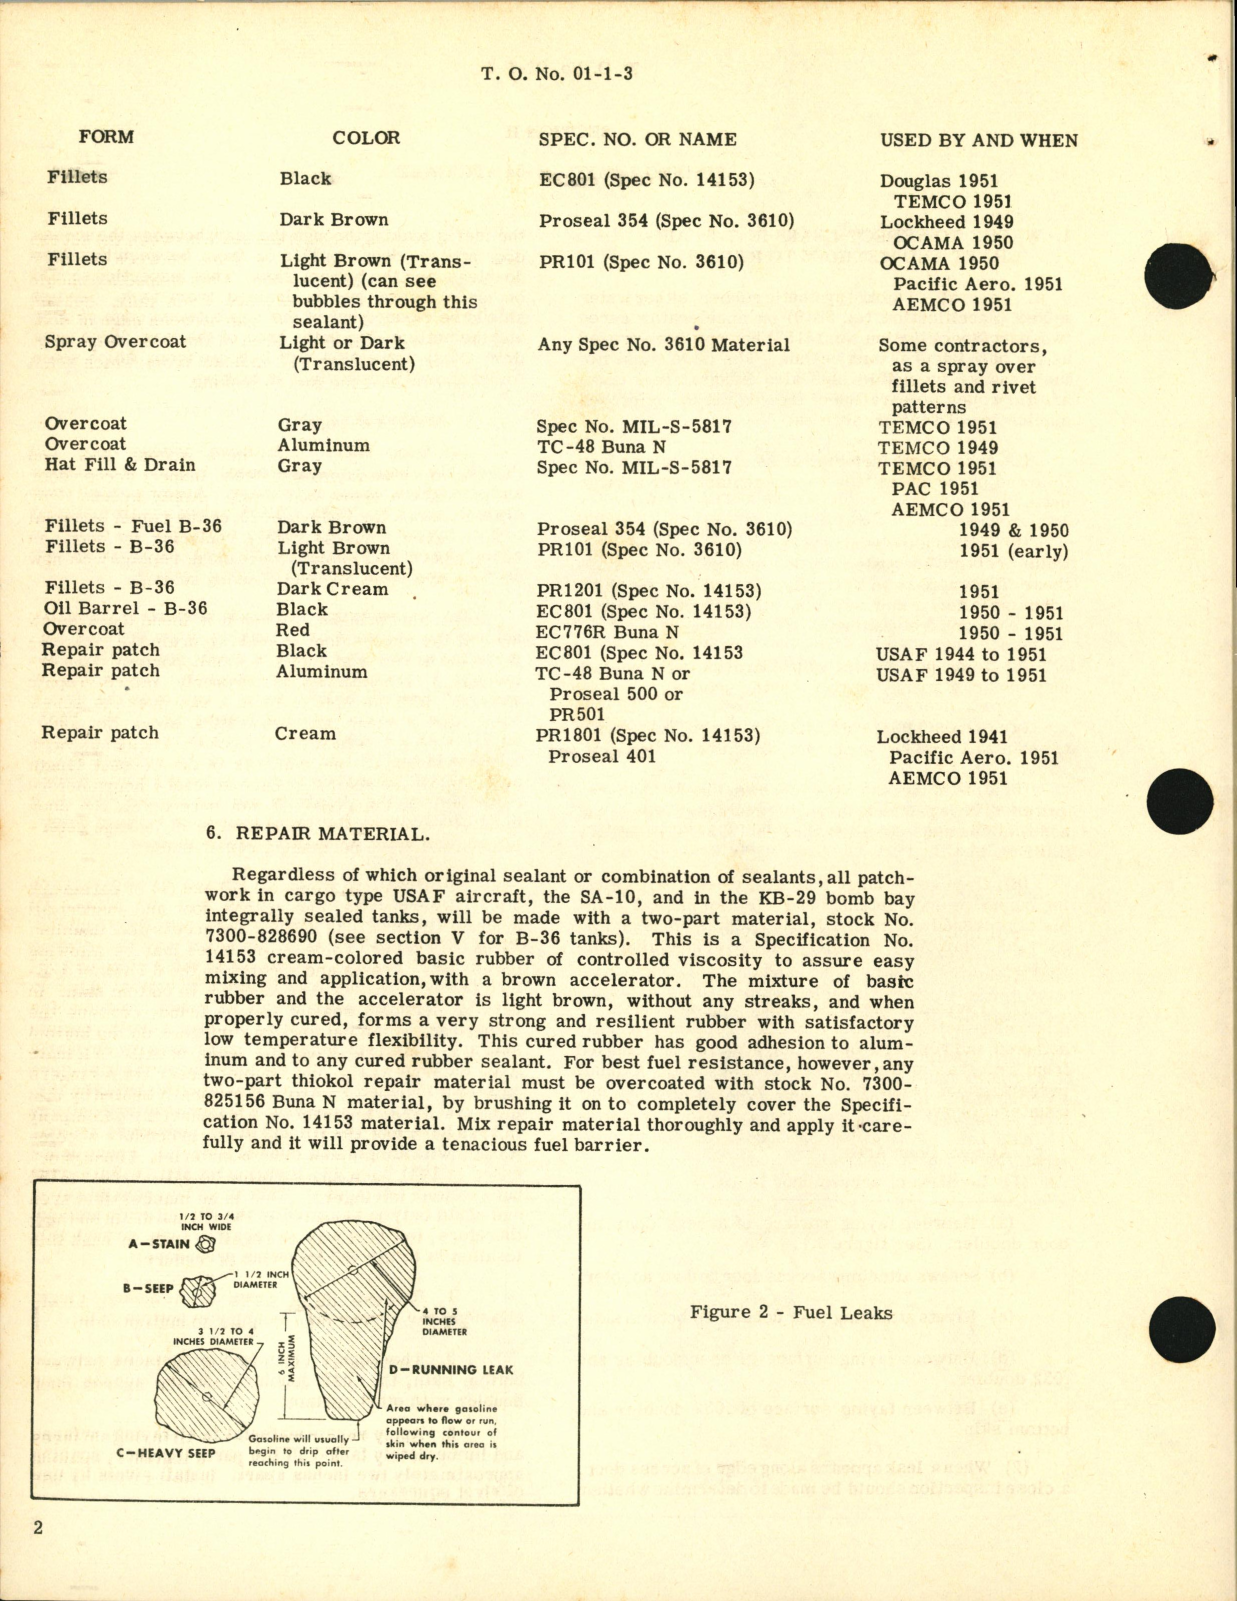 Sample page  6 from AirCorps Library document: Repair of Integral & Removable Metal Fuel & Oil Tanks - 01-1-3